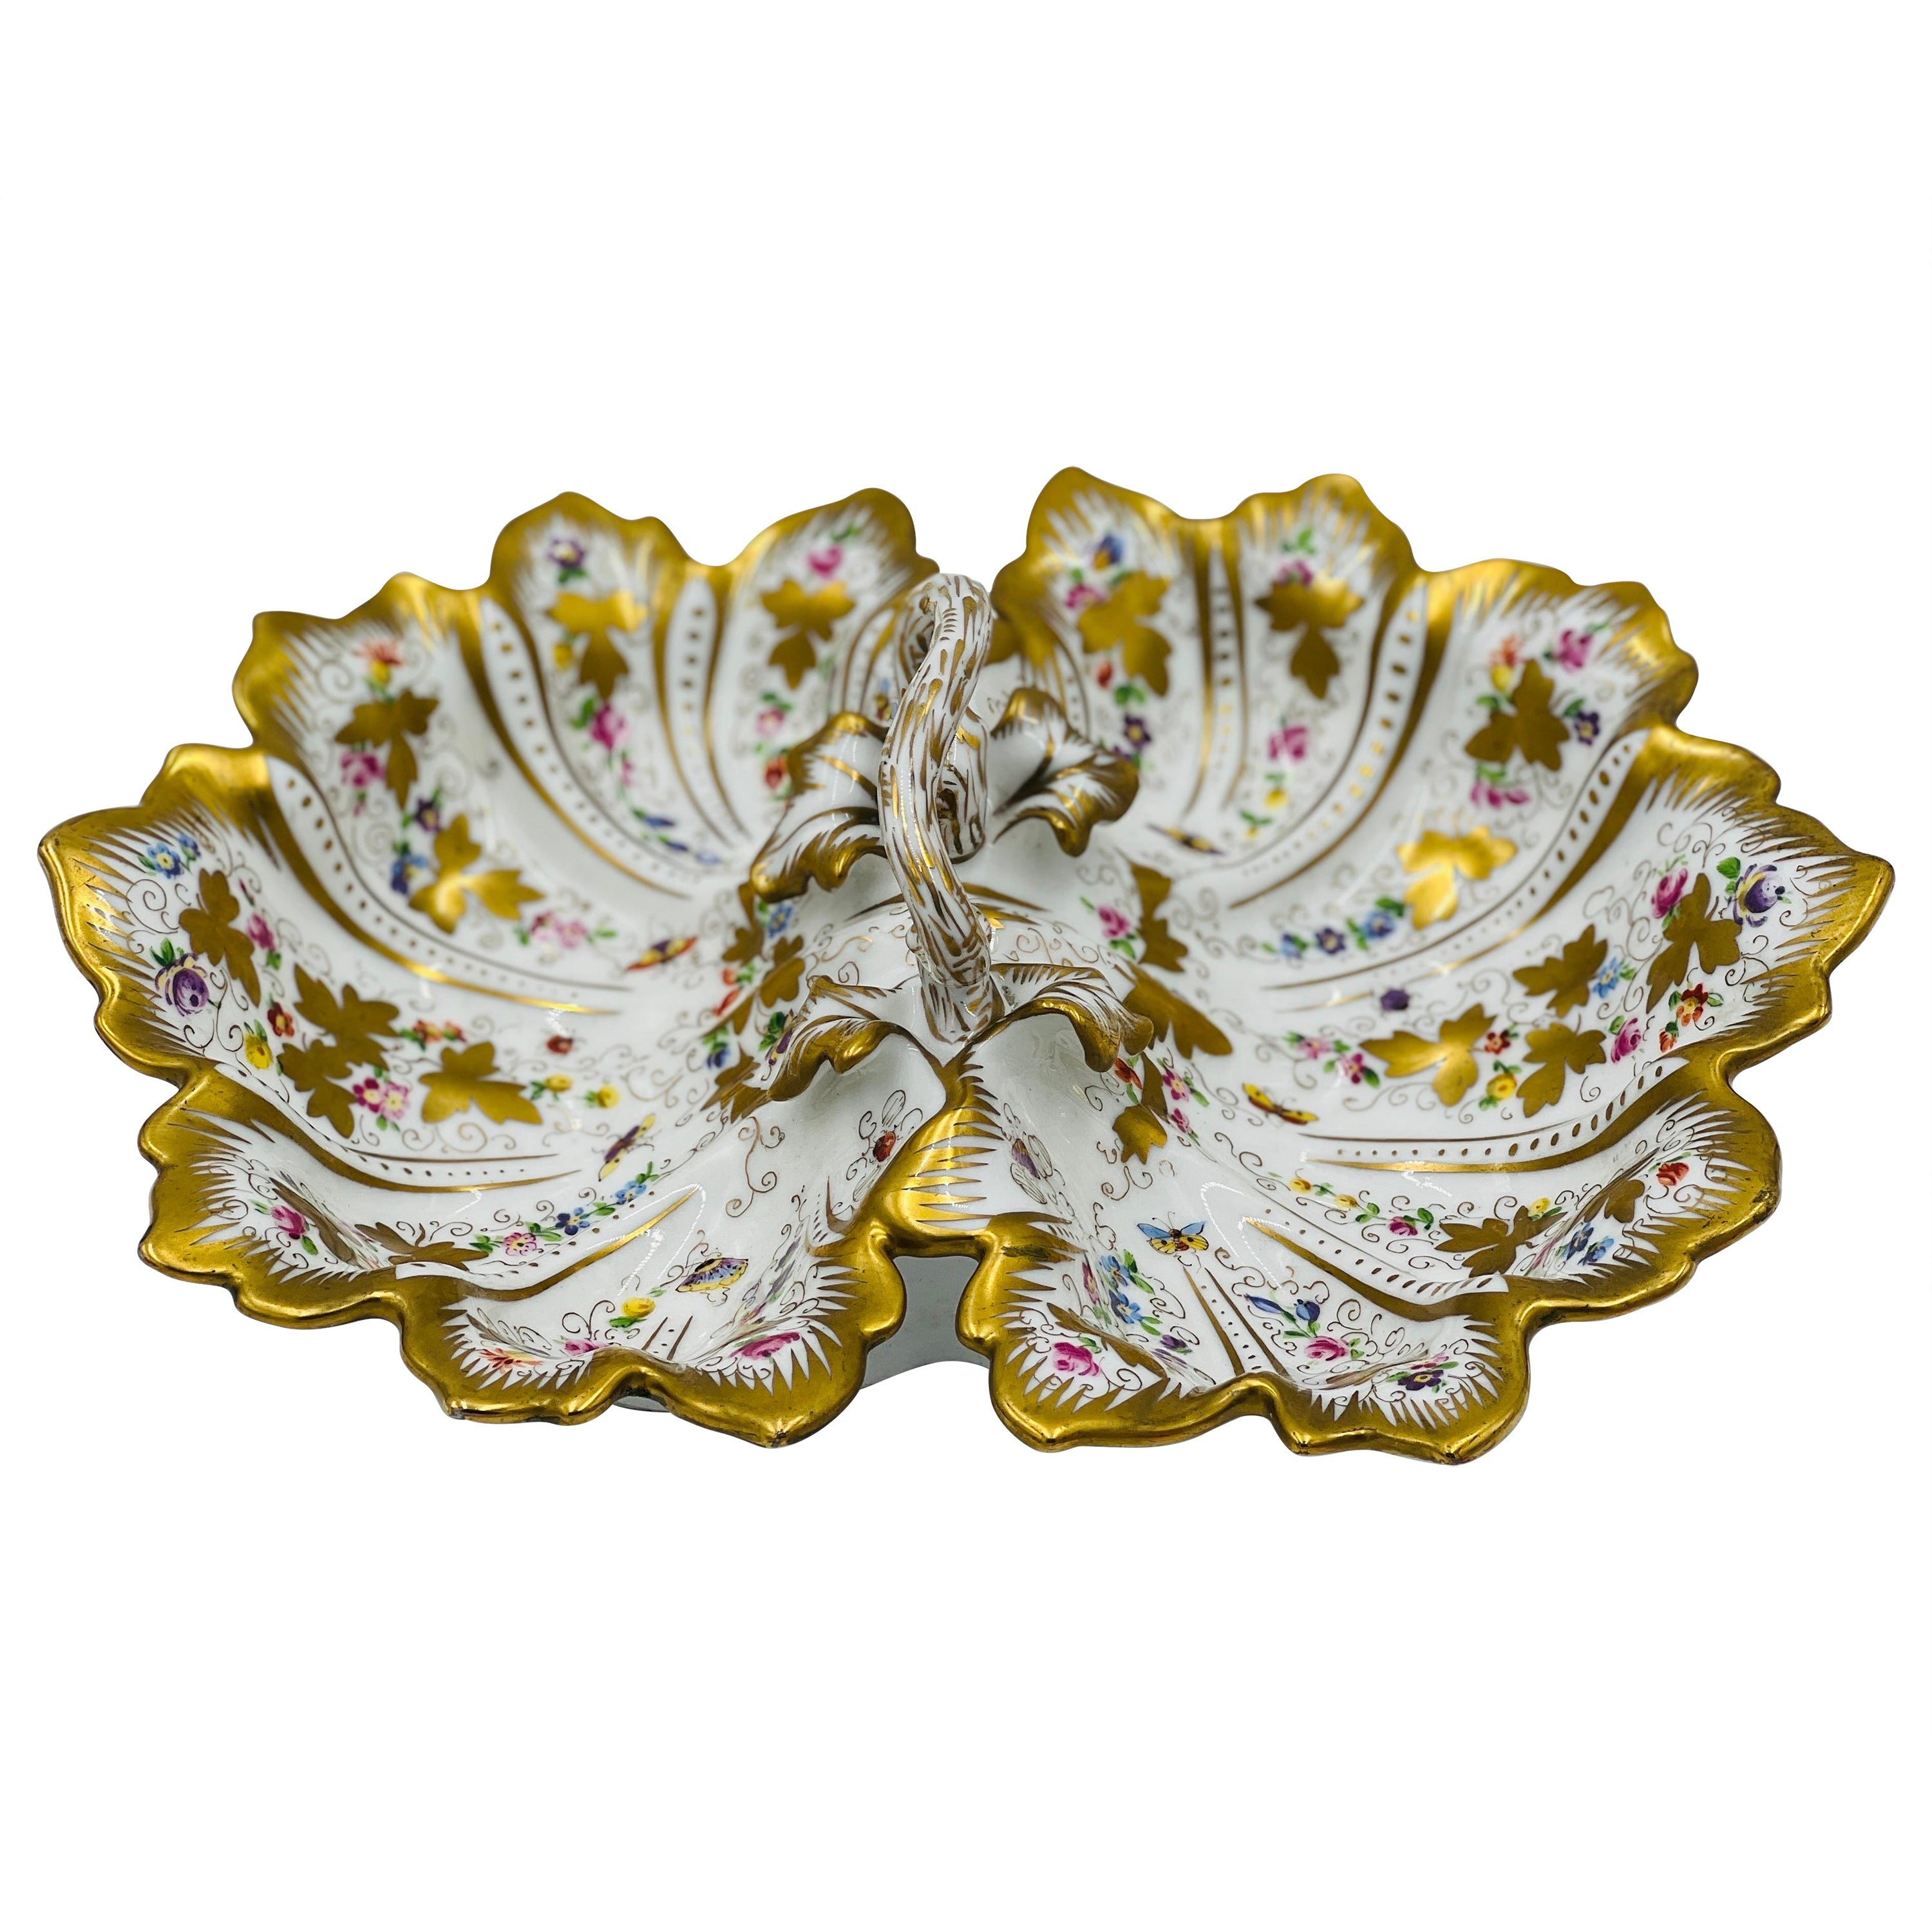 Antique Ornate CT Carl Tielsch Germany Floral Divided Handled Dish Herend Style For Sale